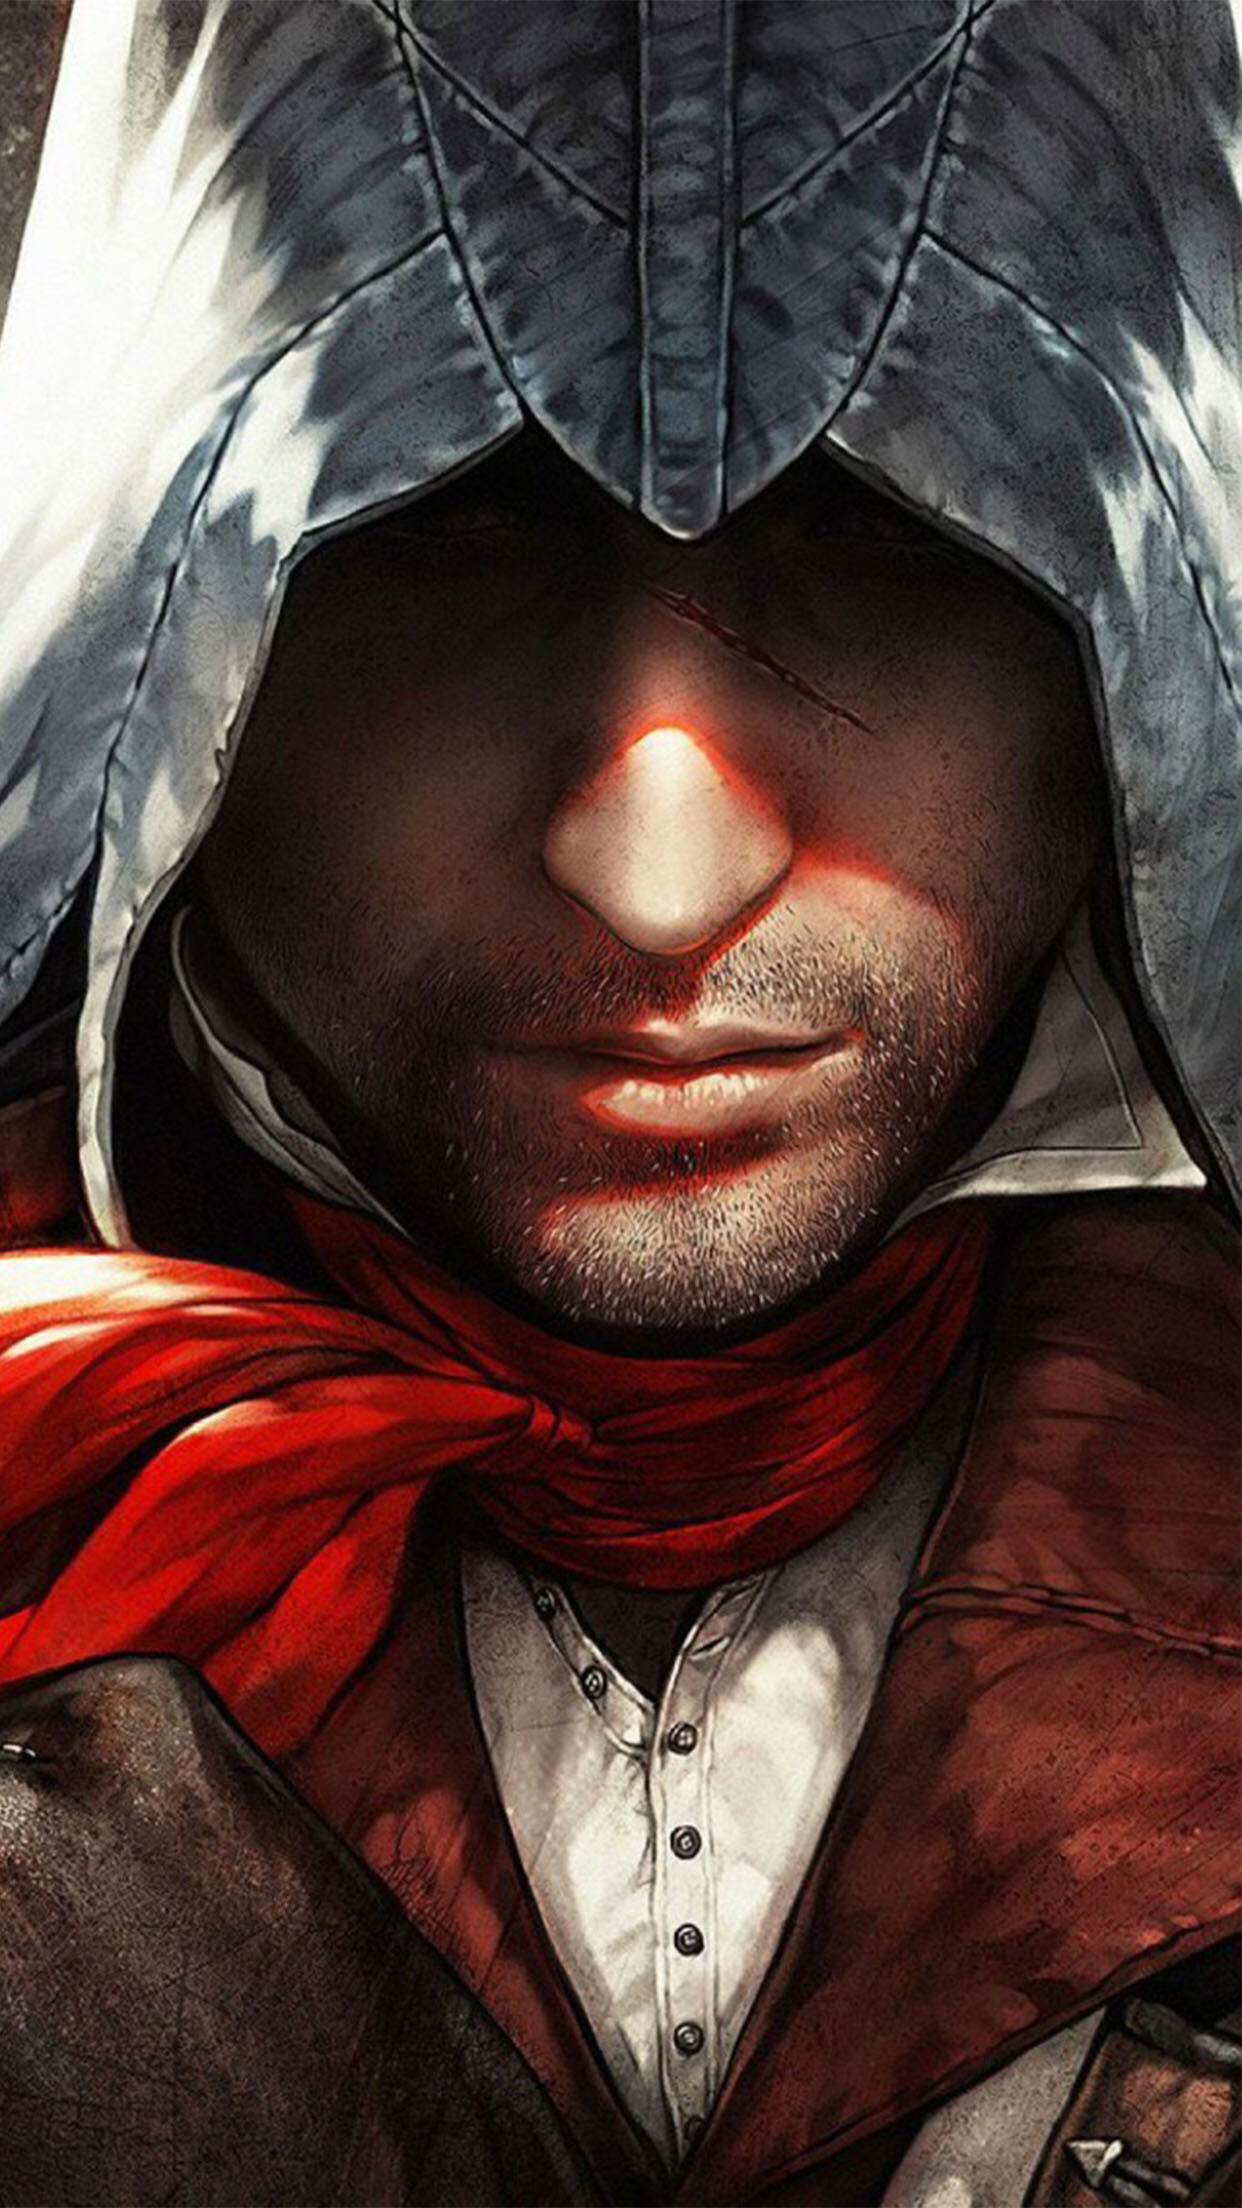 Assassin's Creed: Arno Victor Dorian, A fictional character in Ubisoft's video game franchise. 1250x2210 HD Wallpaper.